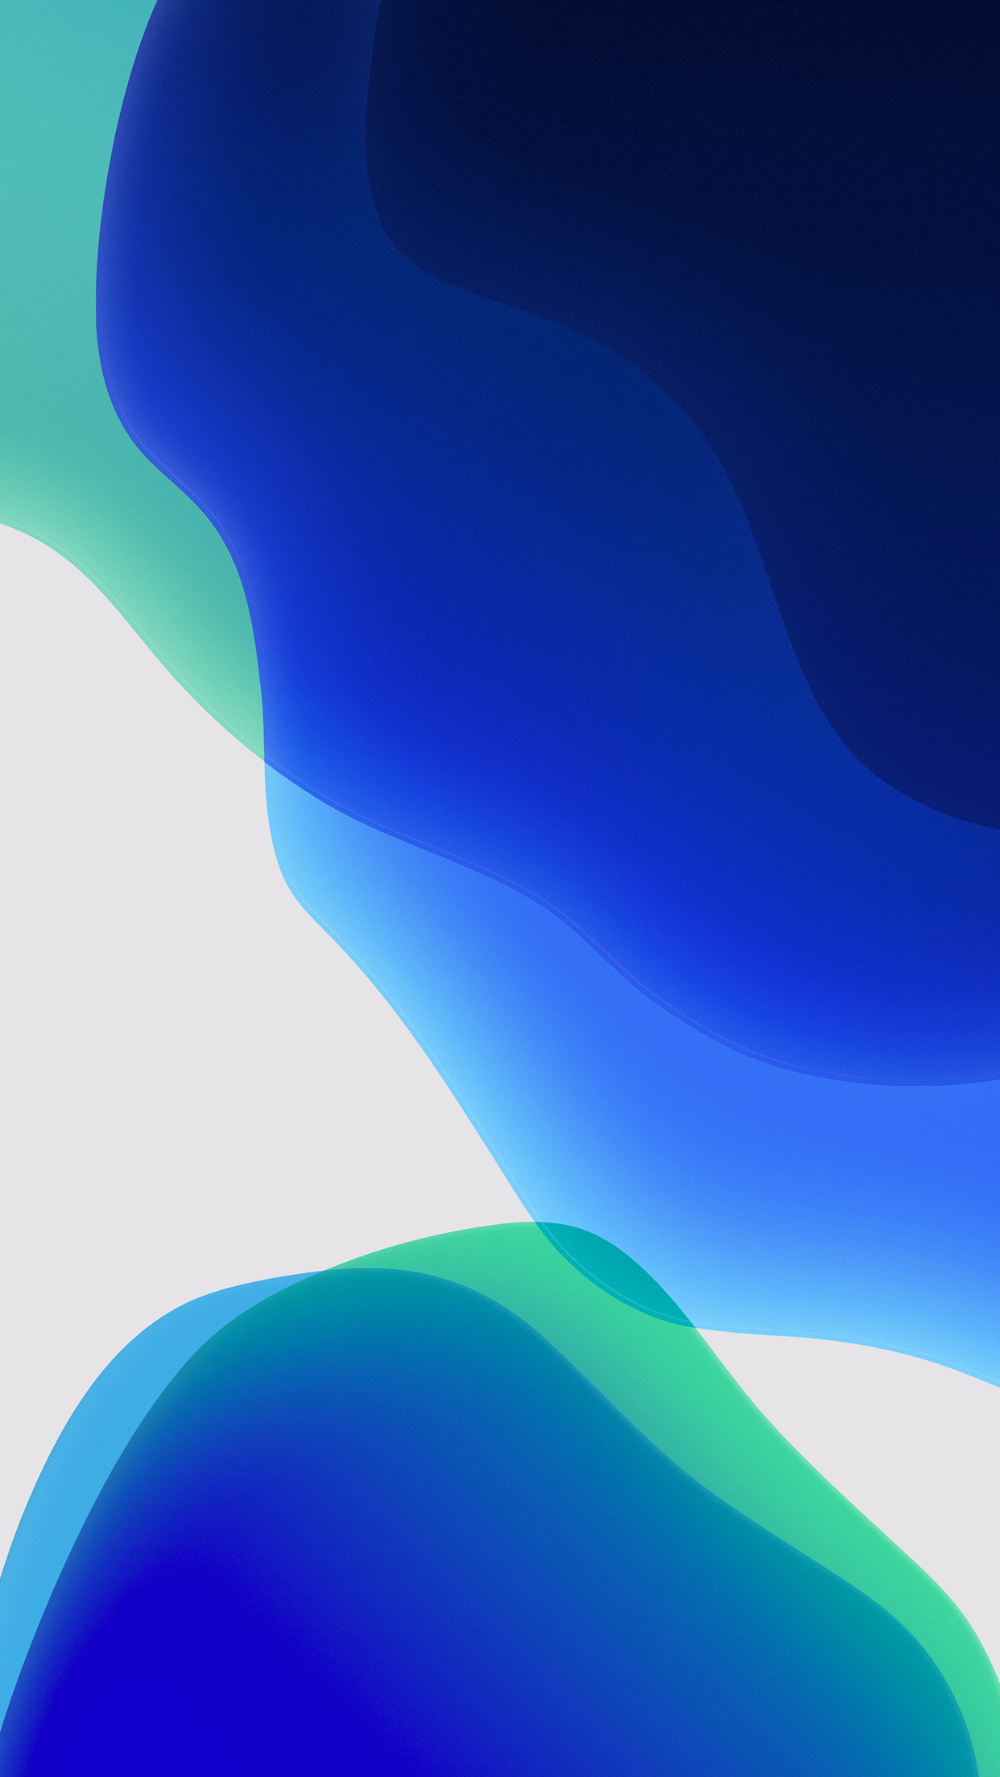 iOS 13 New Wallpaper iPhone XR, iPhone XS, iPhone XS Max, iPhone X. New wallpaper iphone, iPhone wallpaper ios, Abstract iphone wallpaper